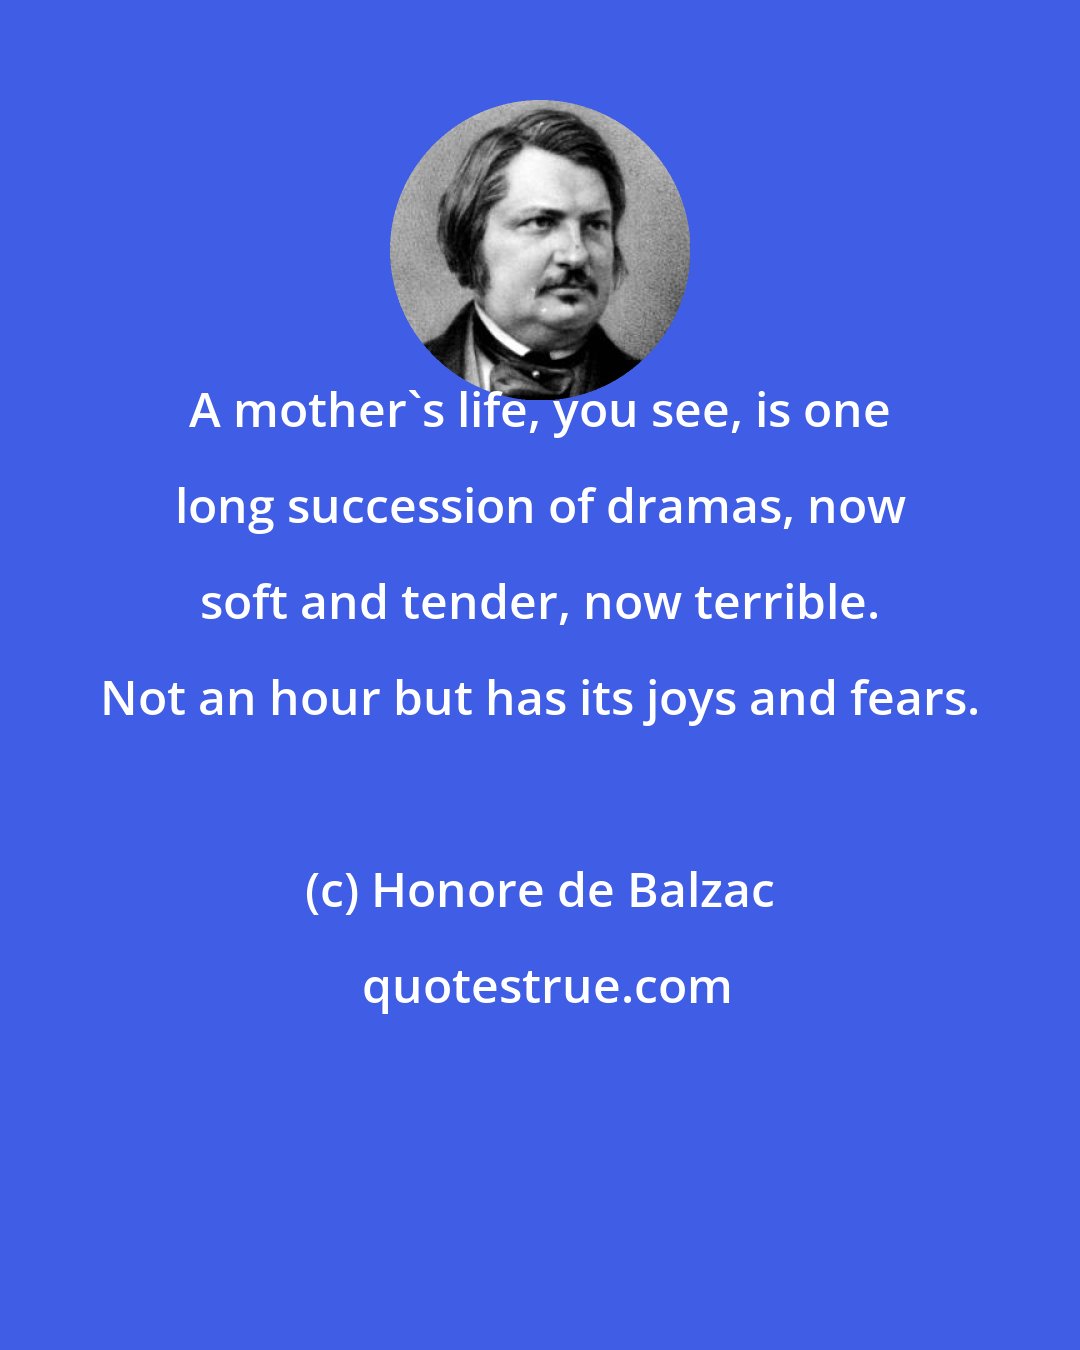 Honore de Balzac: A mother's life, you see, is one long succession of dramas, now soft and tender, now terrible. Not an hour but has its joys and fears.